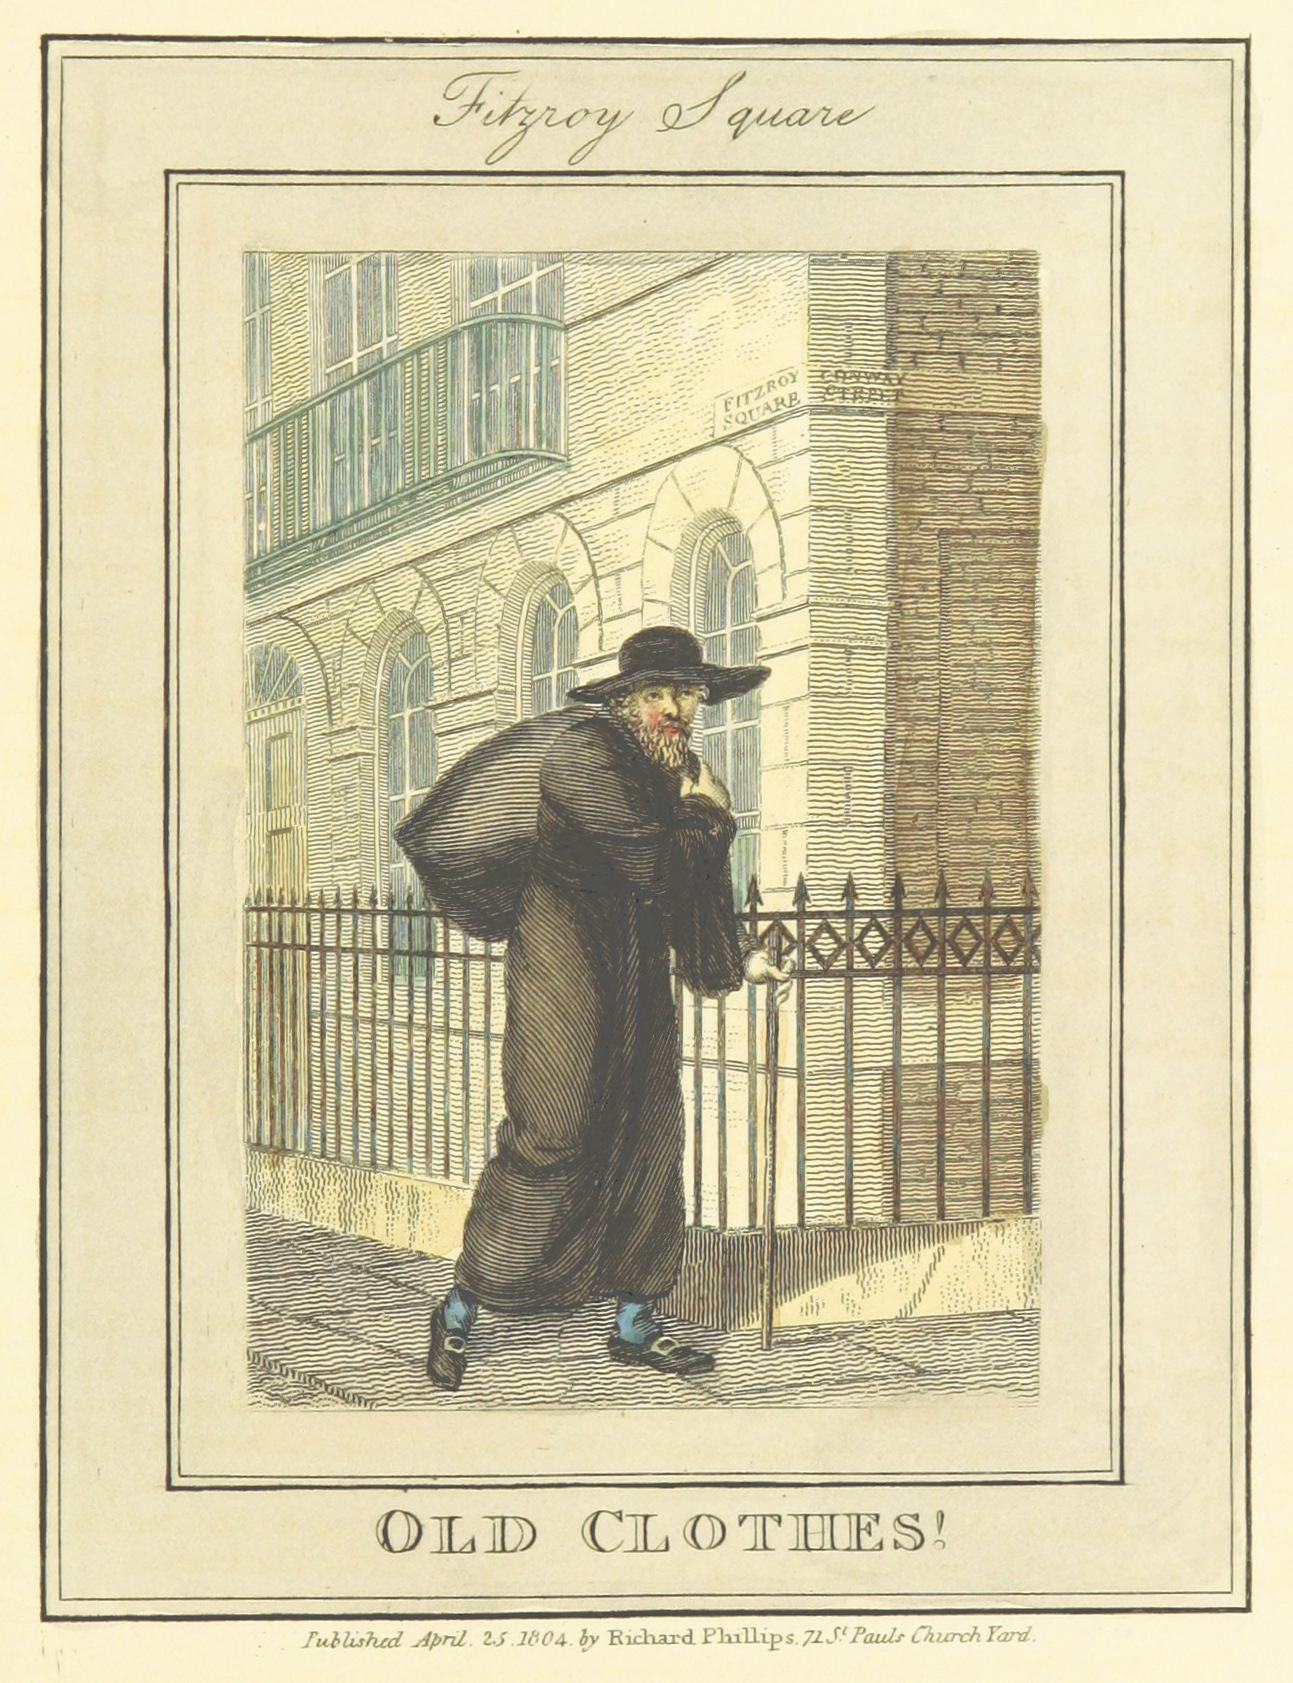 Phillips(1804)_p637_-_Fitzroy_Square_-_Old_Clothes!